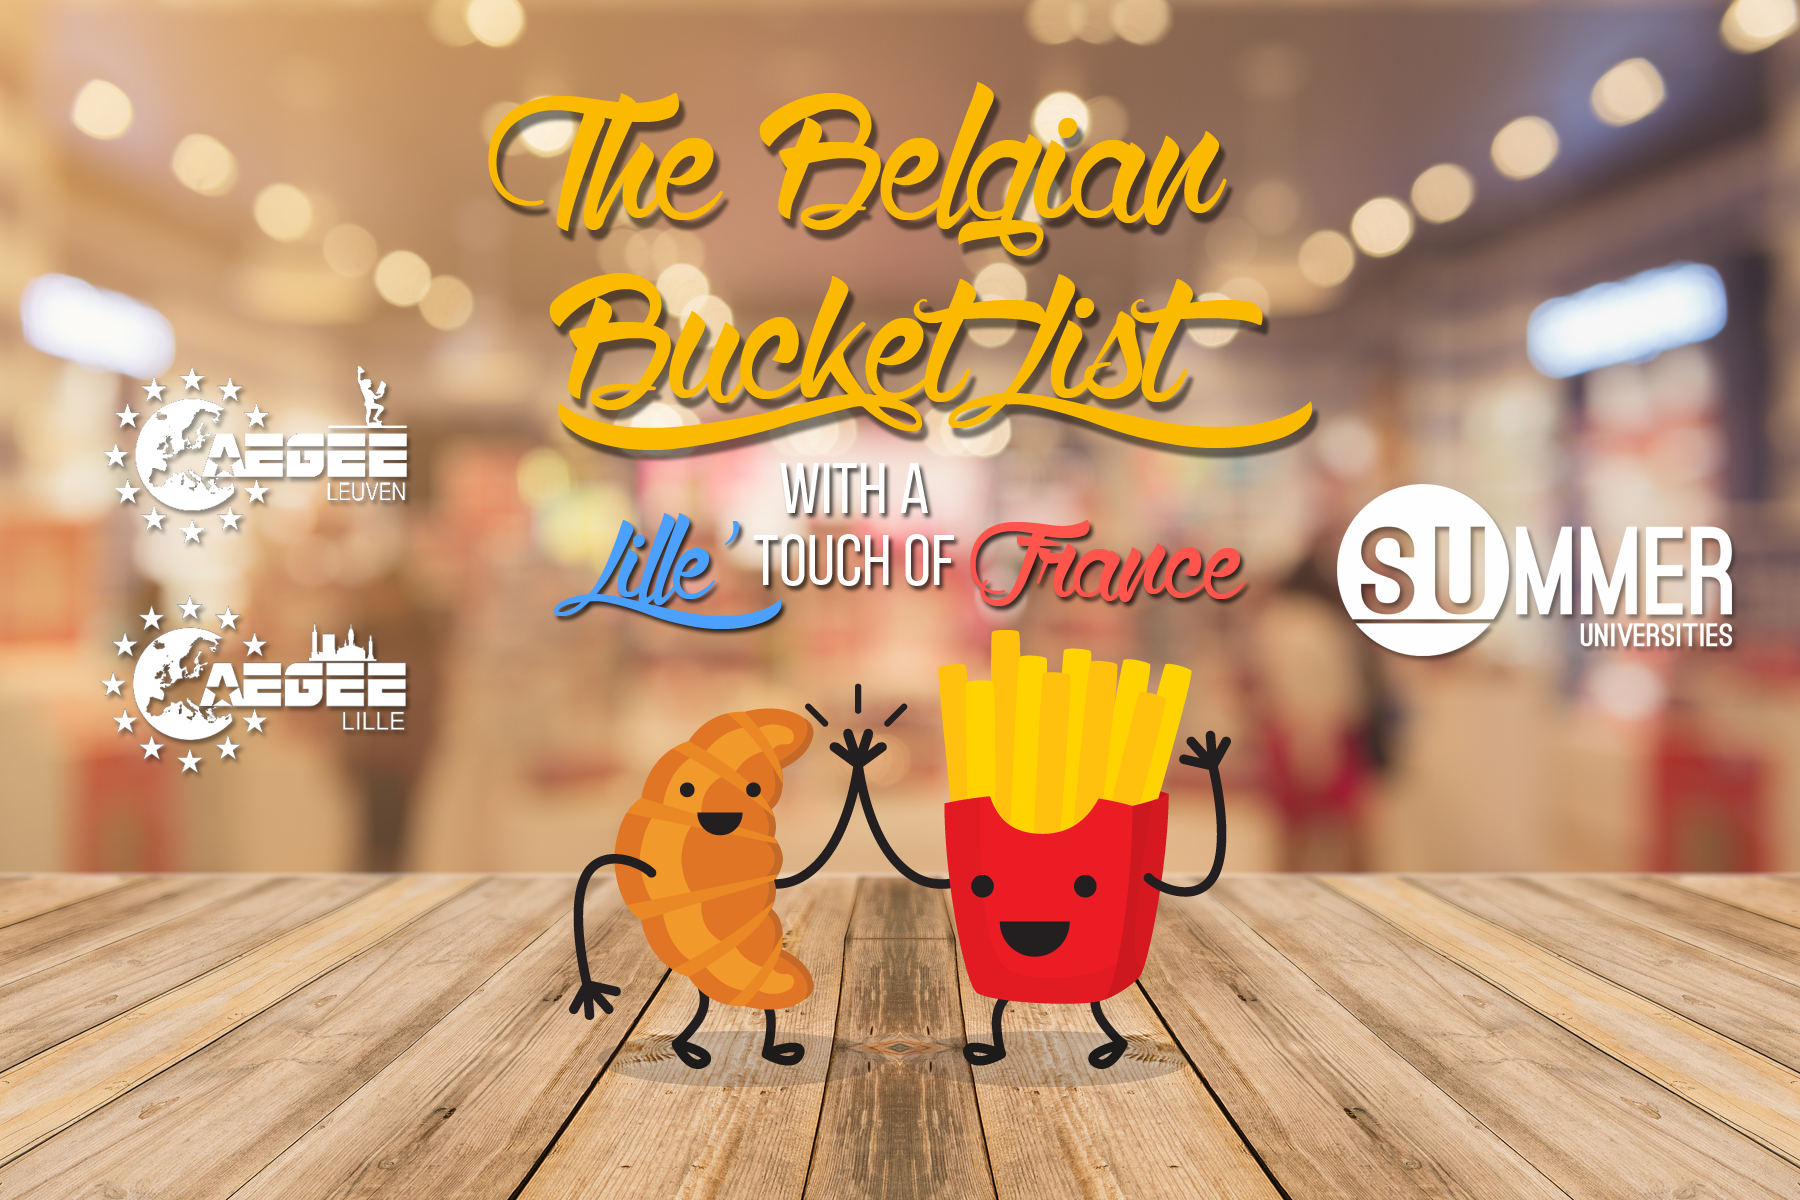 The Belgian Bucketlist, with a Lille’ touch of France! Profile Picture